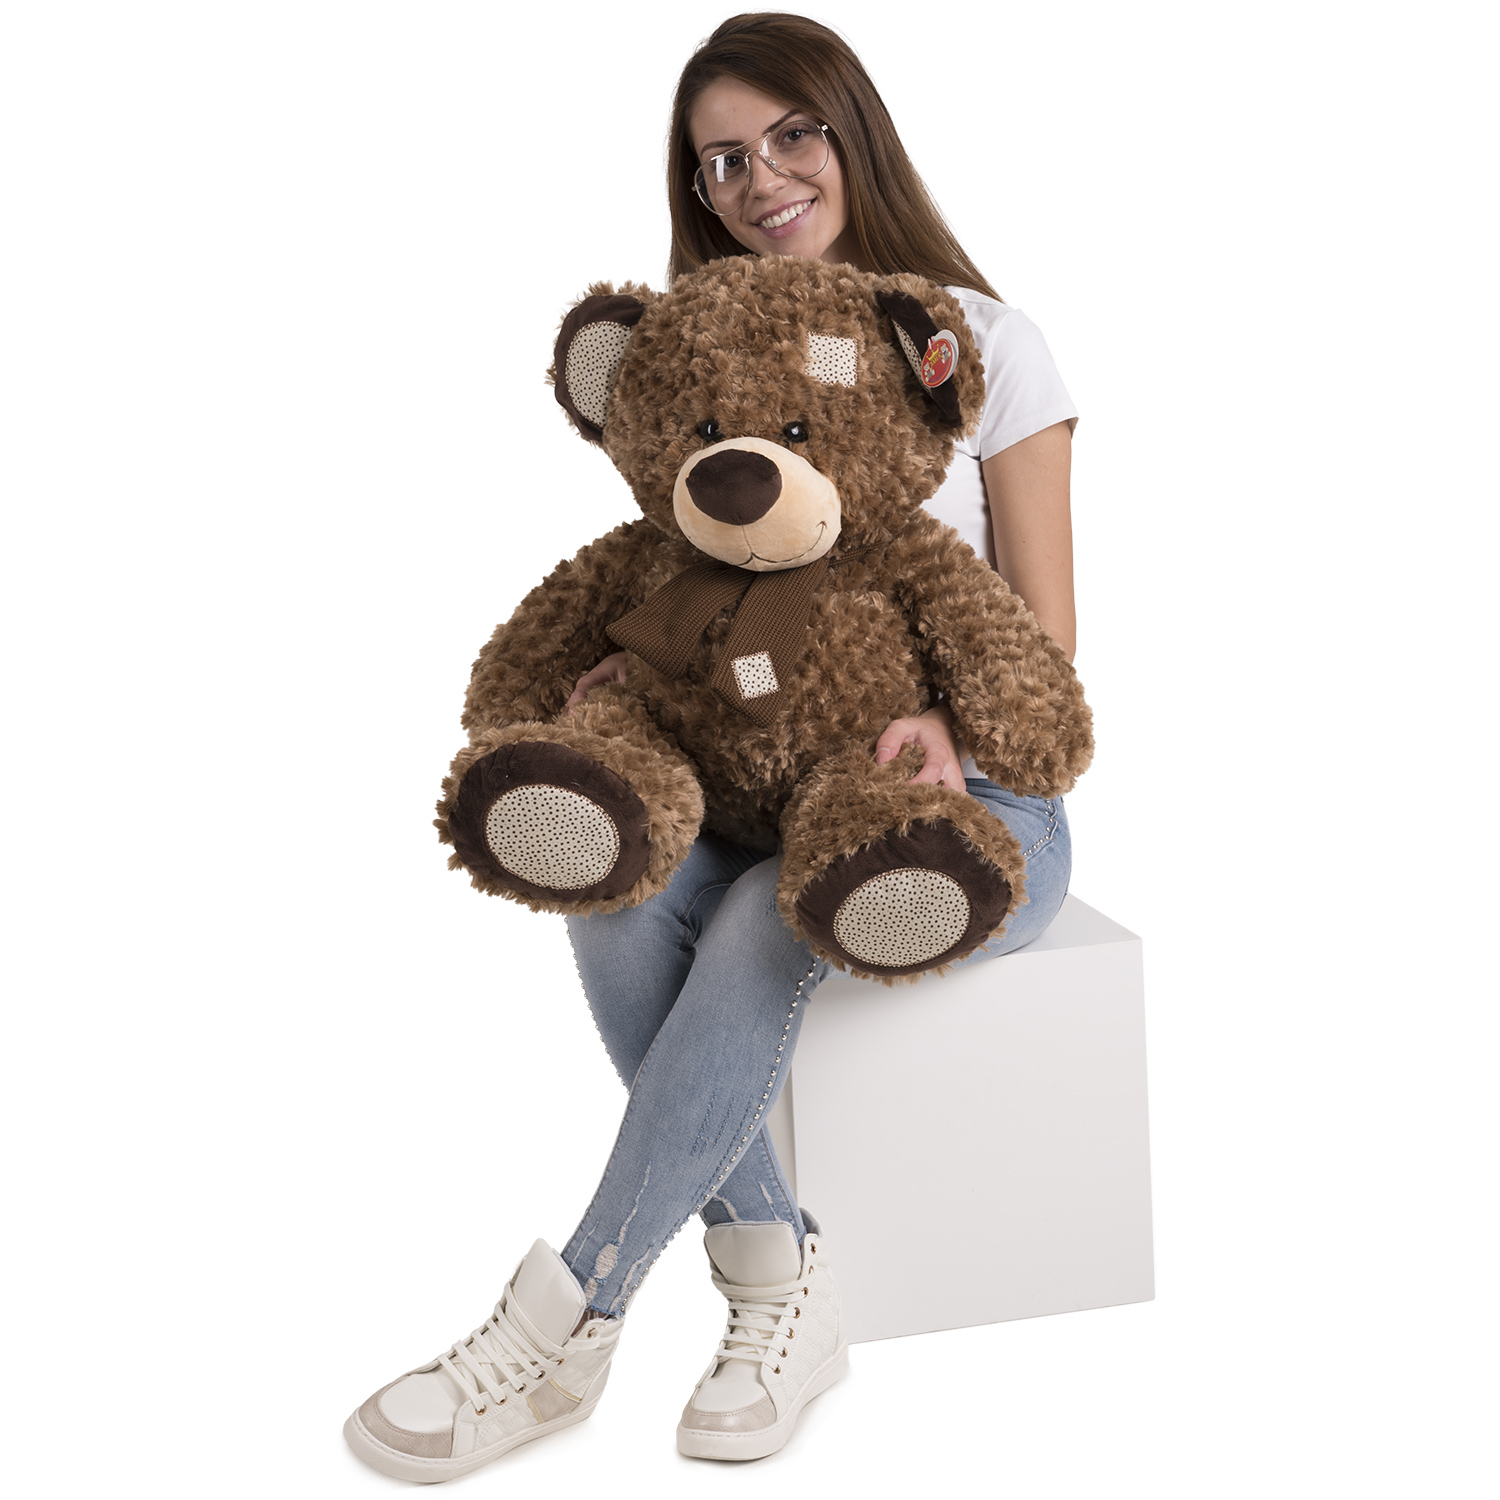 Bear with scarf and patches - Light brown